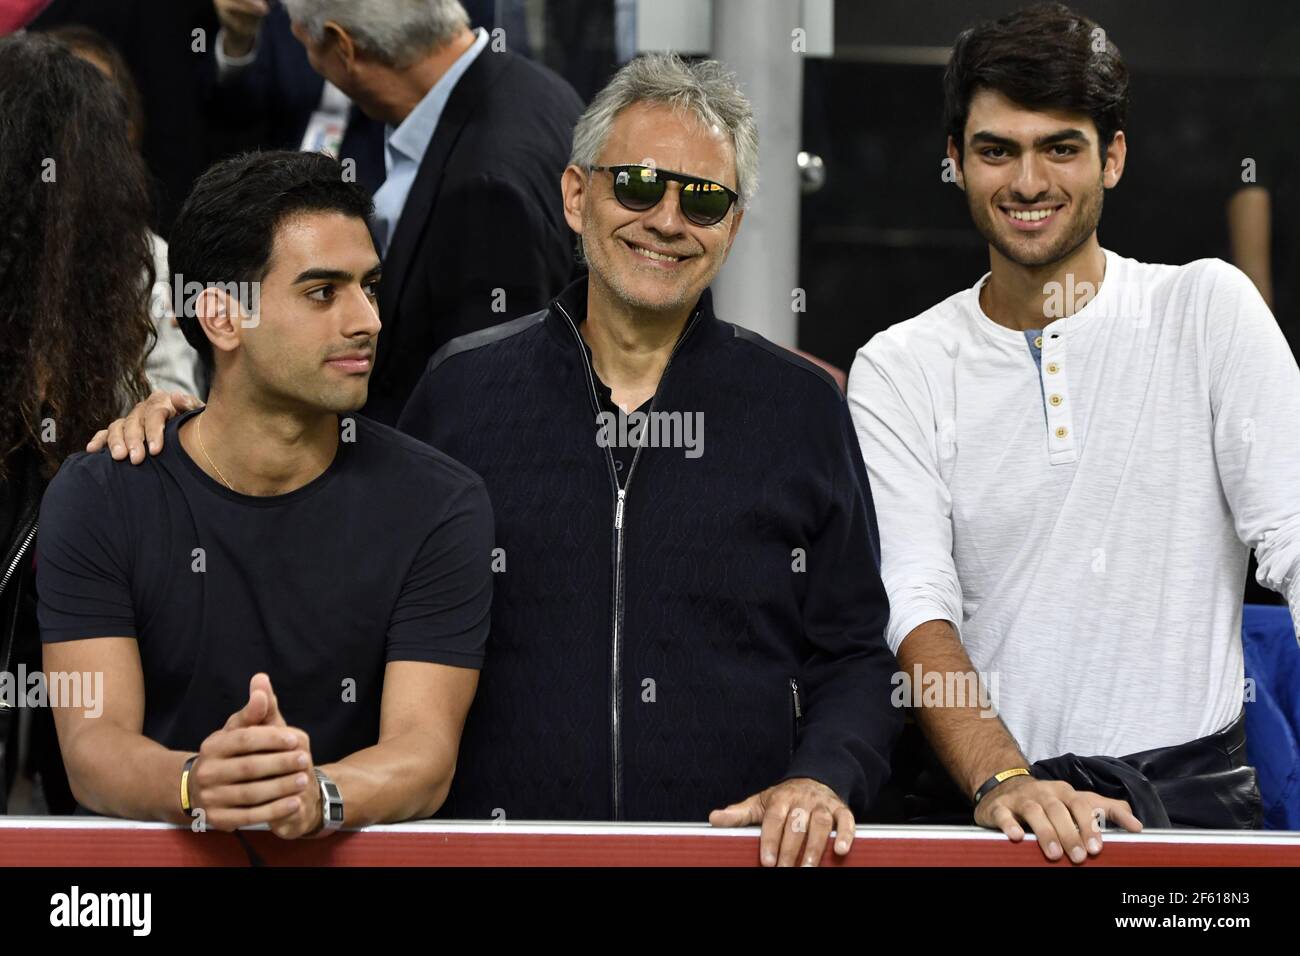 Amos bocelli and matteo bocelli hi-res stock photography and images - Alamy